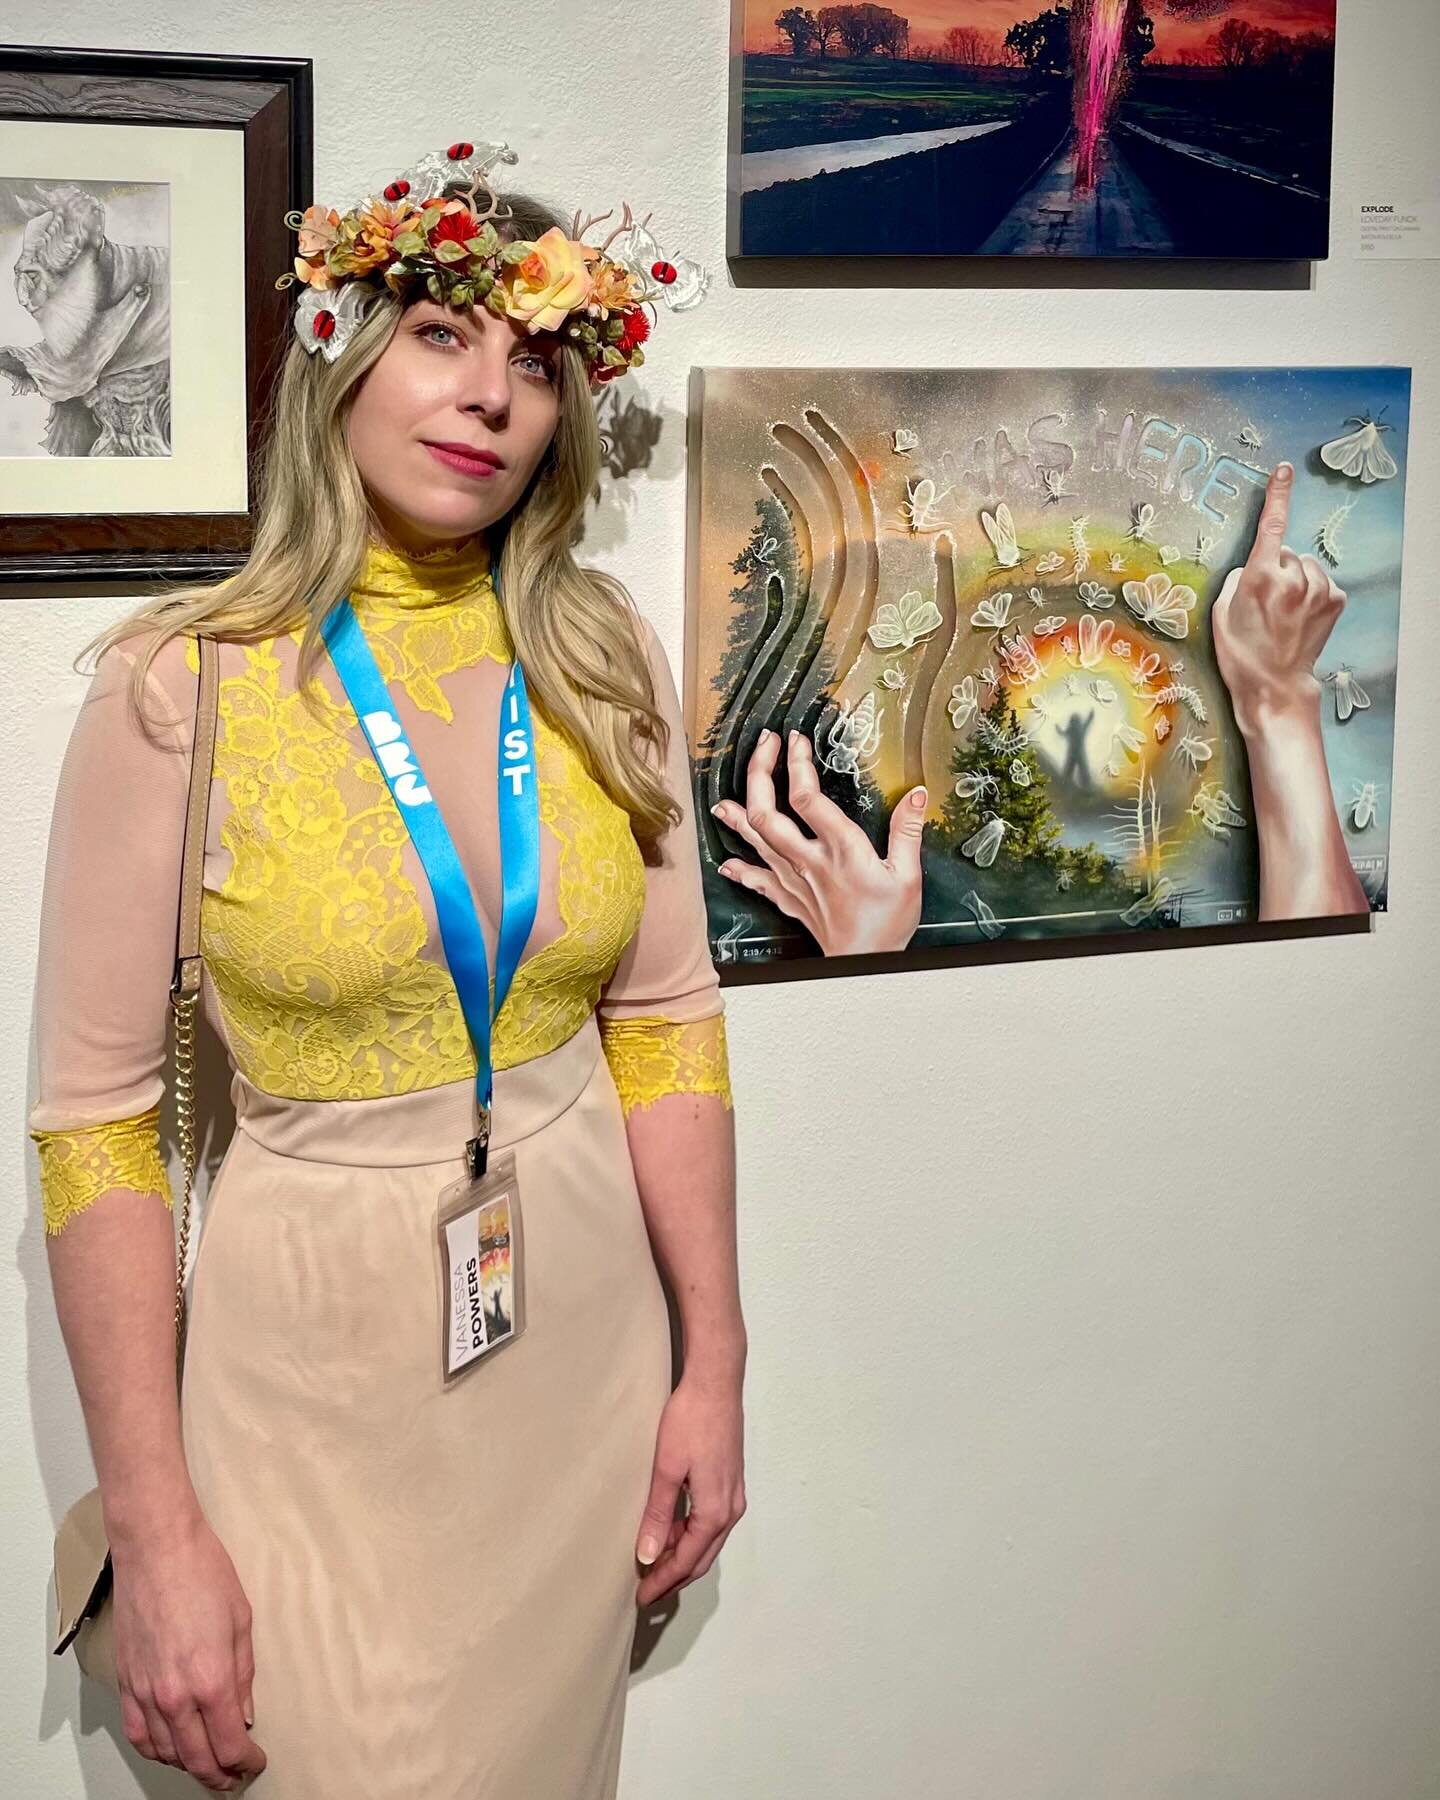 Had the pleasure to attend the Surreal Soir&eacute;e last weekend! Thanks to everyone at @brgallery and juror @bethcavener for inviting me to be a part of the Surreal Salon🤍 I really enjoyed meeting the other artists from around the world and talkin